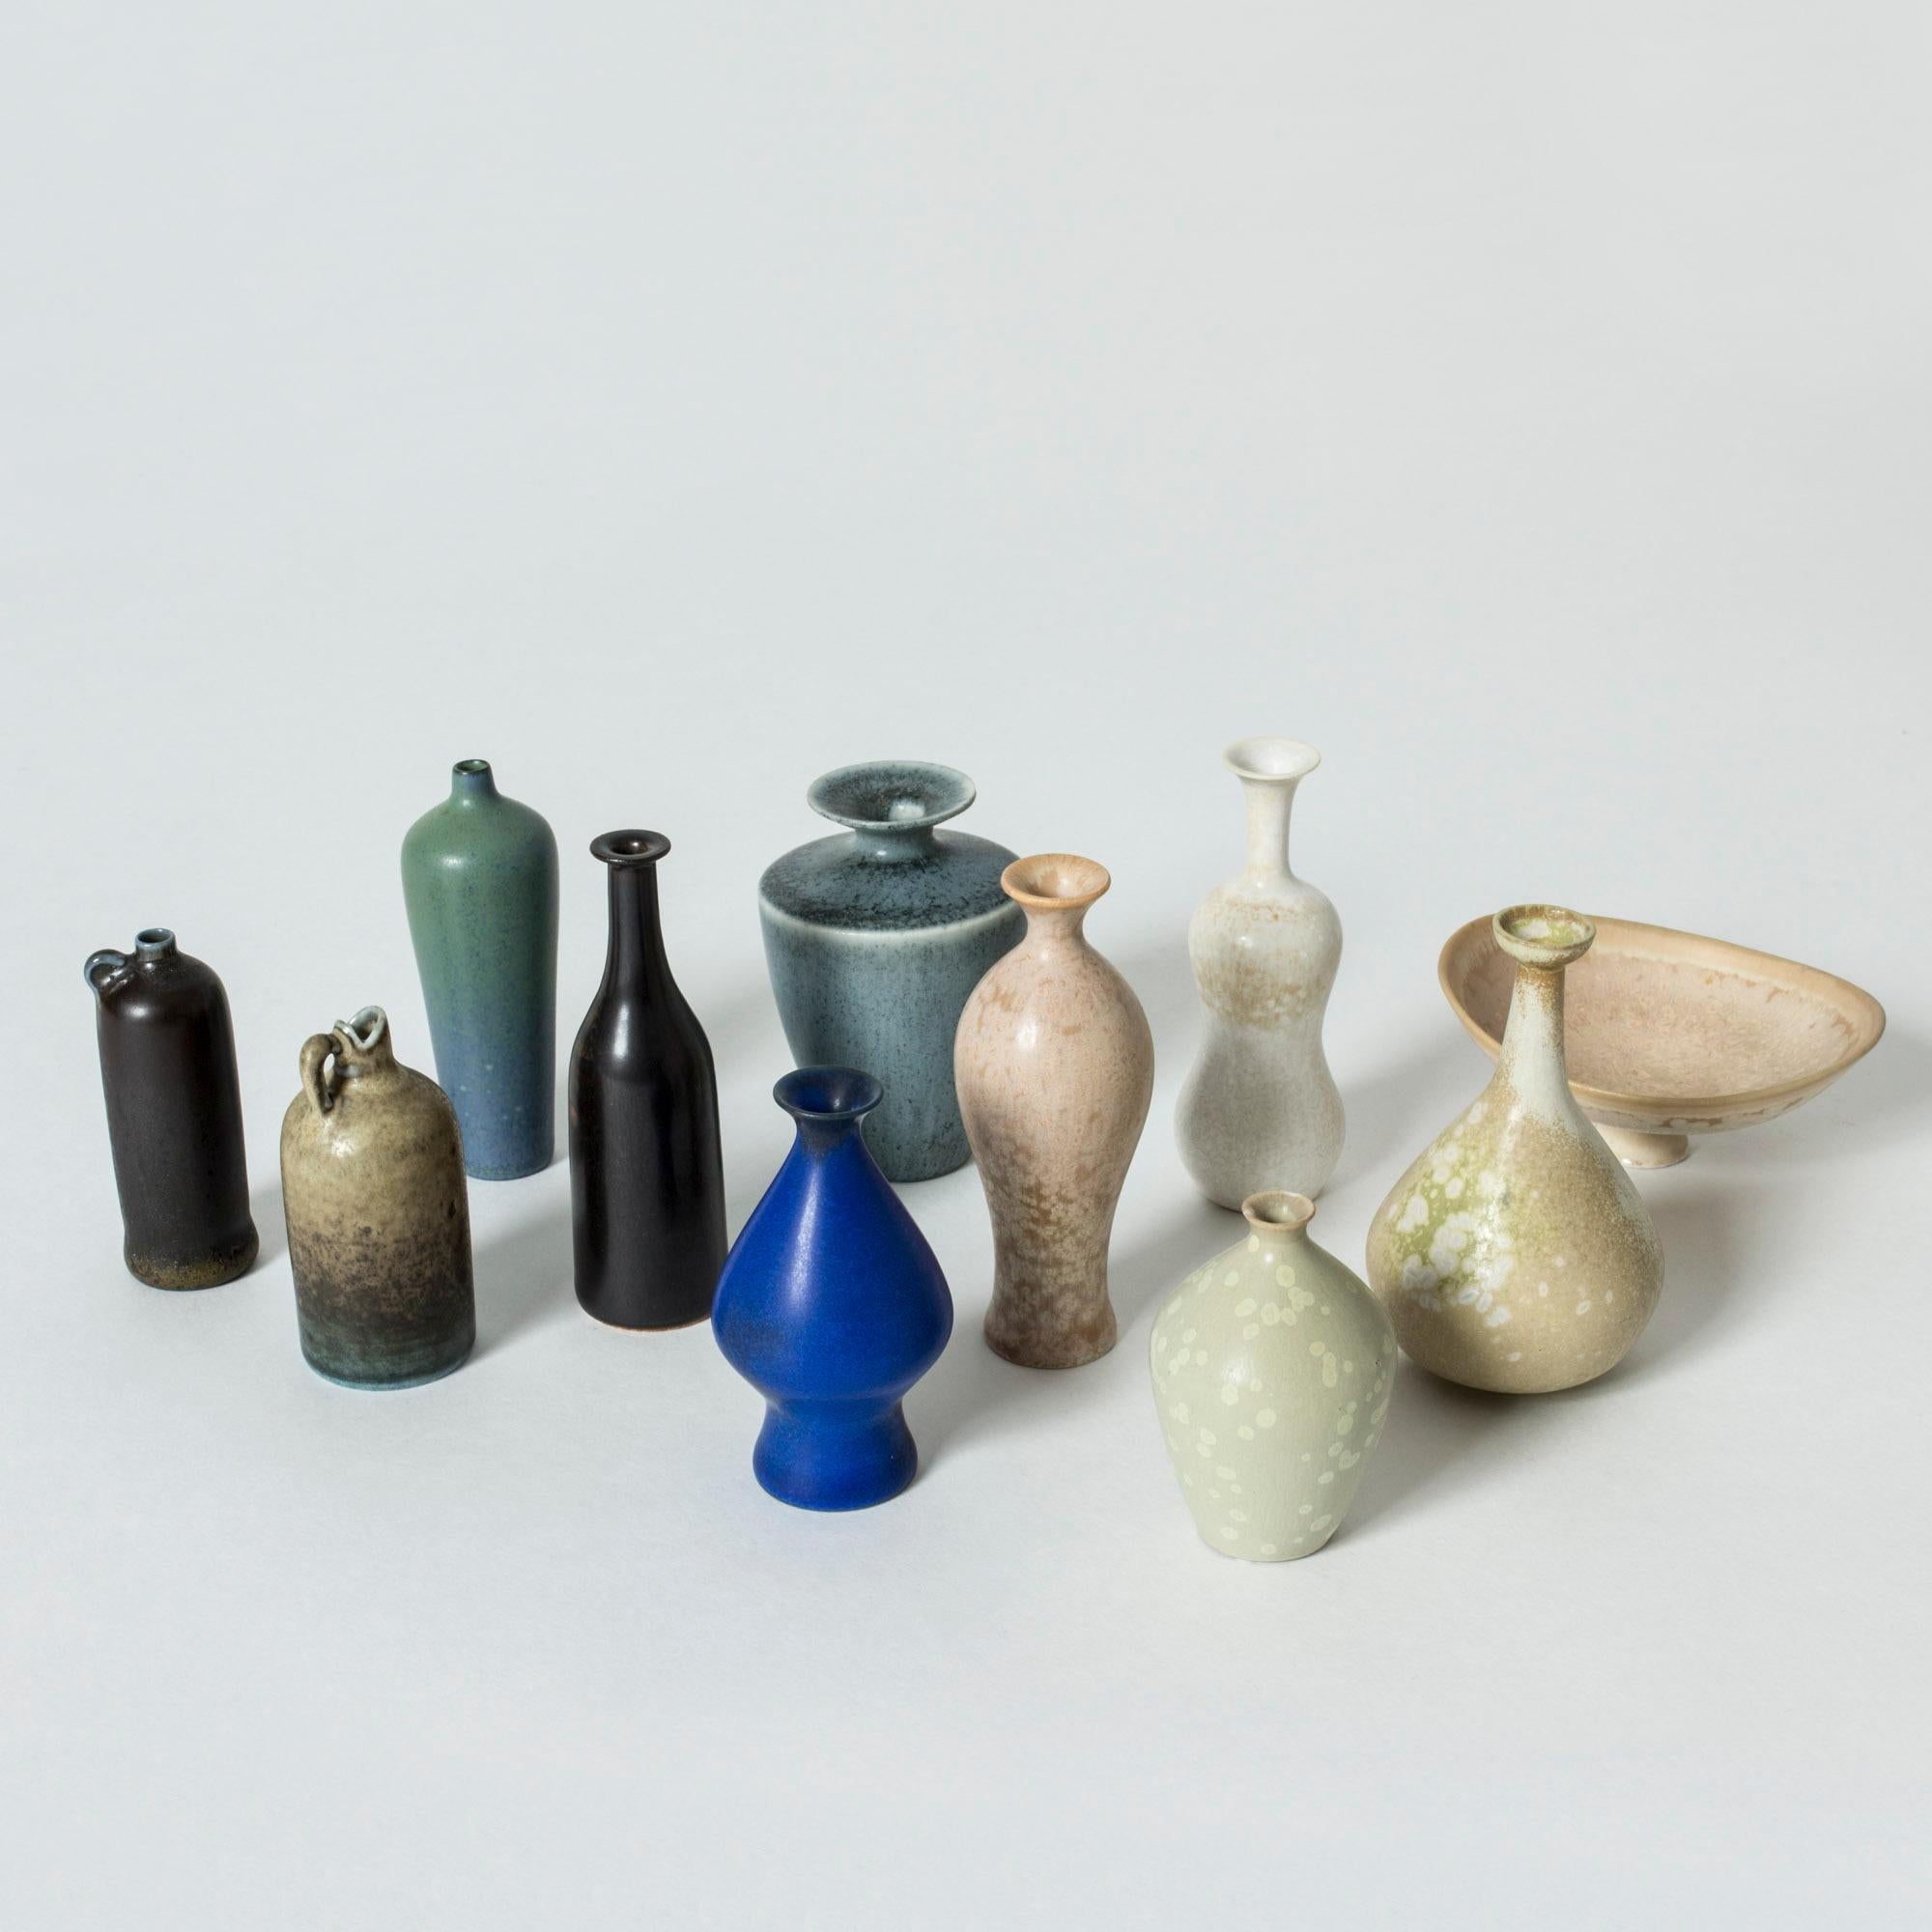 Collection of ten miniature stoneware vases and one bowl by Gunnar Nylund. Exquisite little pieces in different forms. Some are tiny flasks, others imaginative curvaceous vases. Some have pastel colored glaze with “Mimosa” flecks, others have the